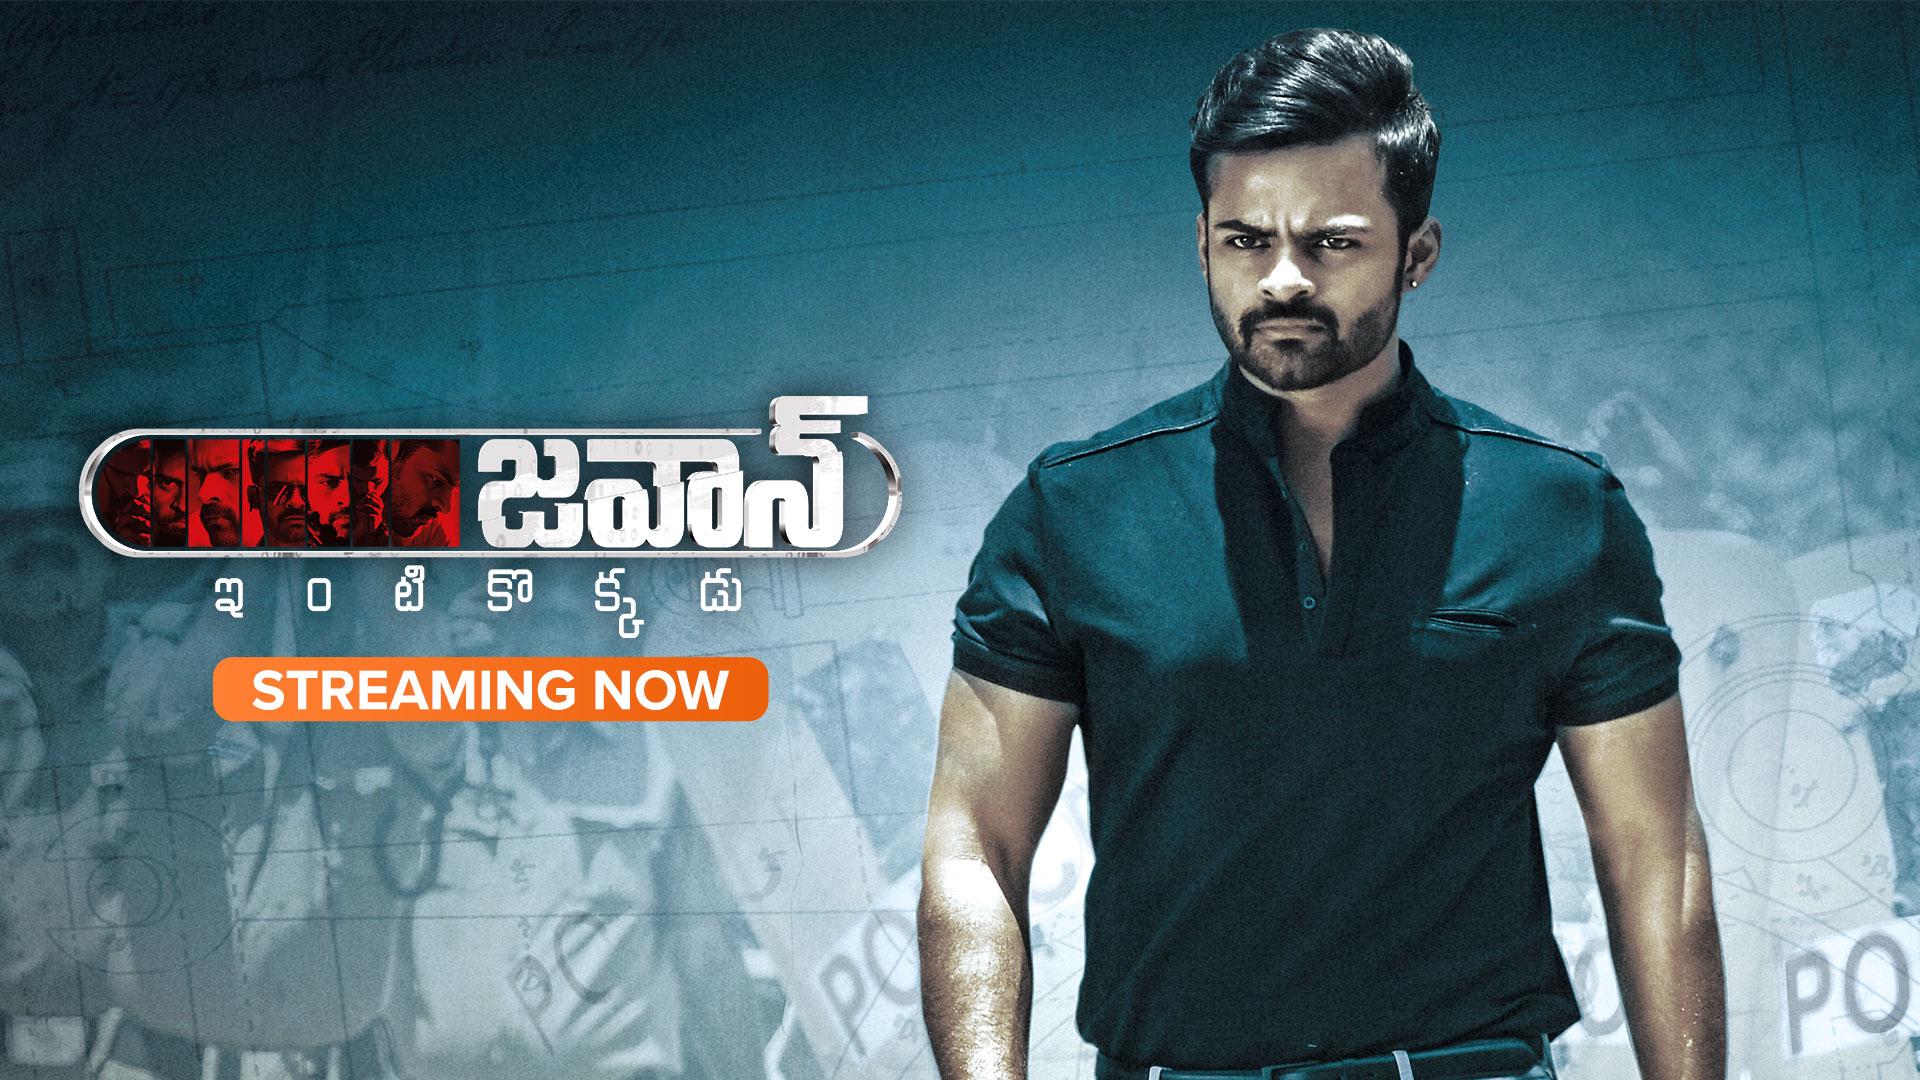 Watch Jawaan Full Movie Online in HD Quality - Download Now